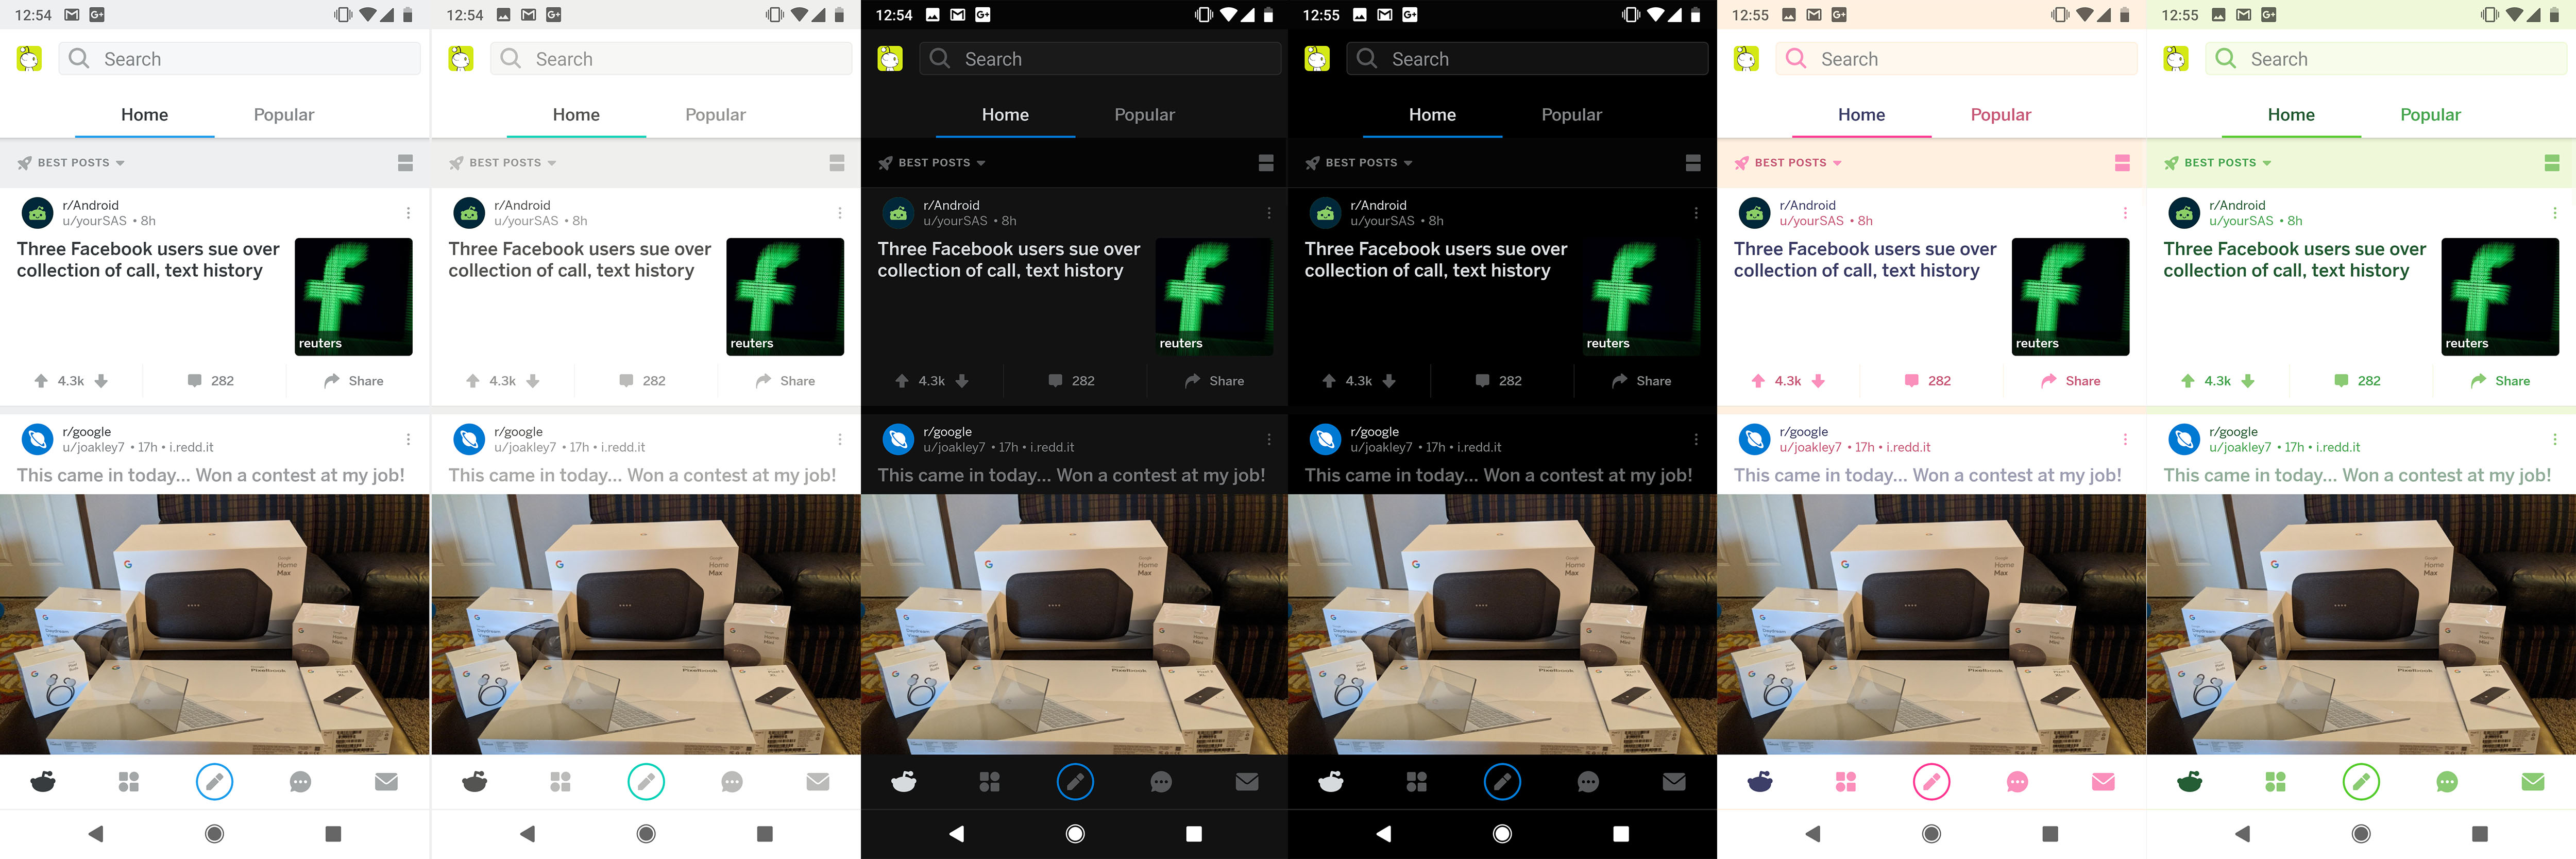 Why Is The Darkish Mode On My Android App Of Reddit All Of Sudden